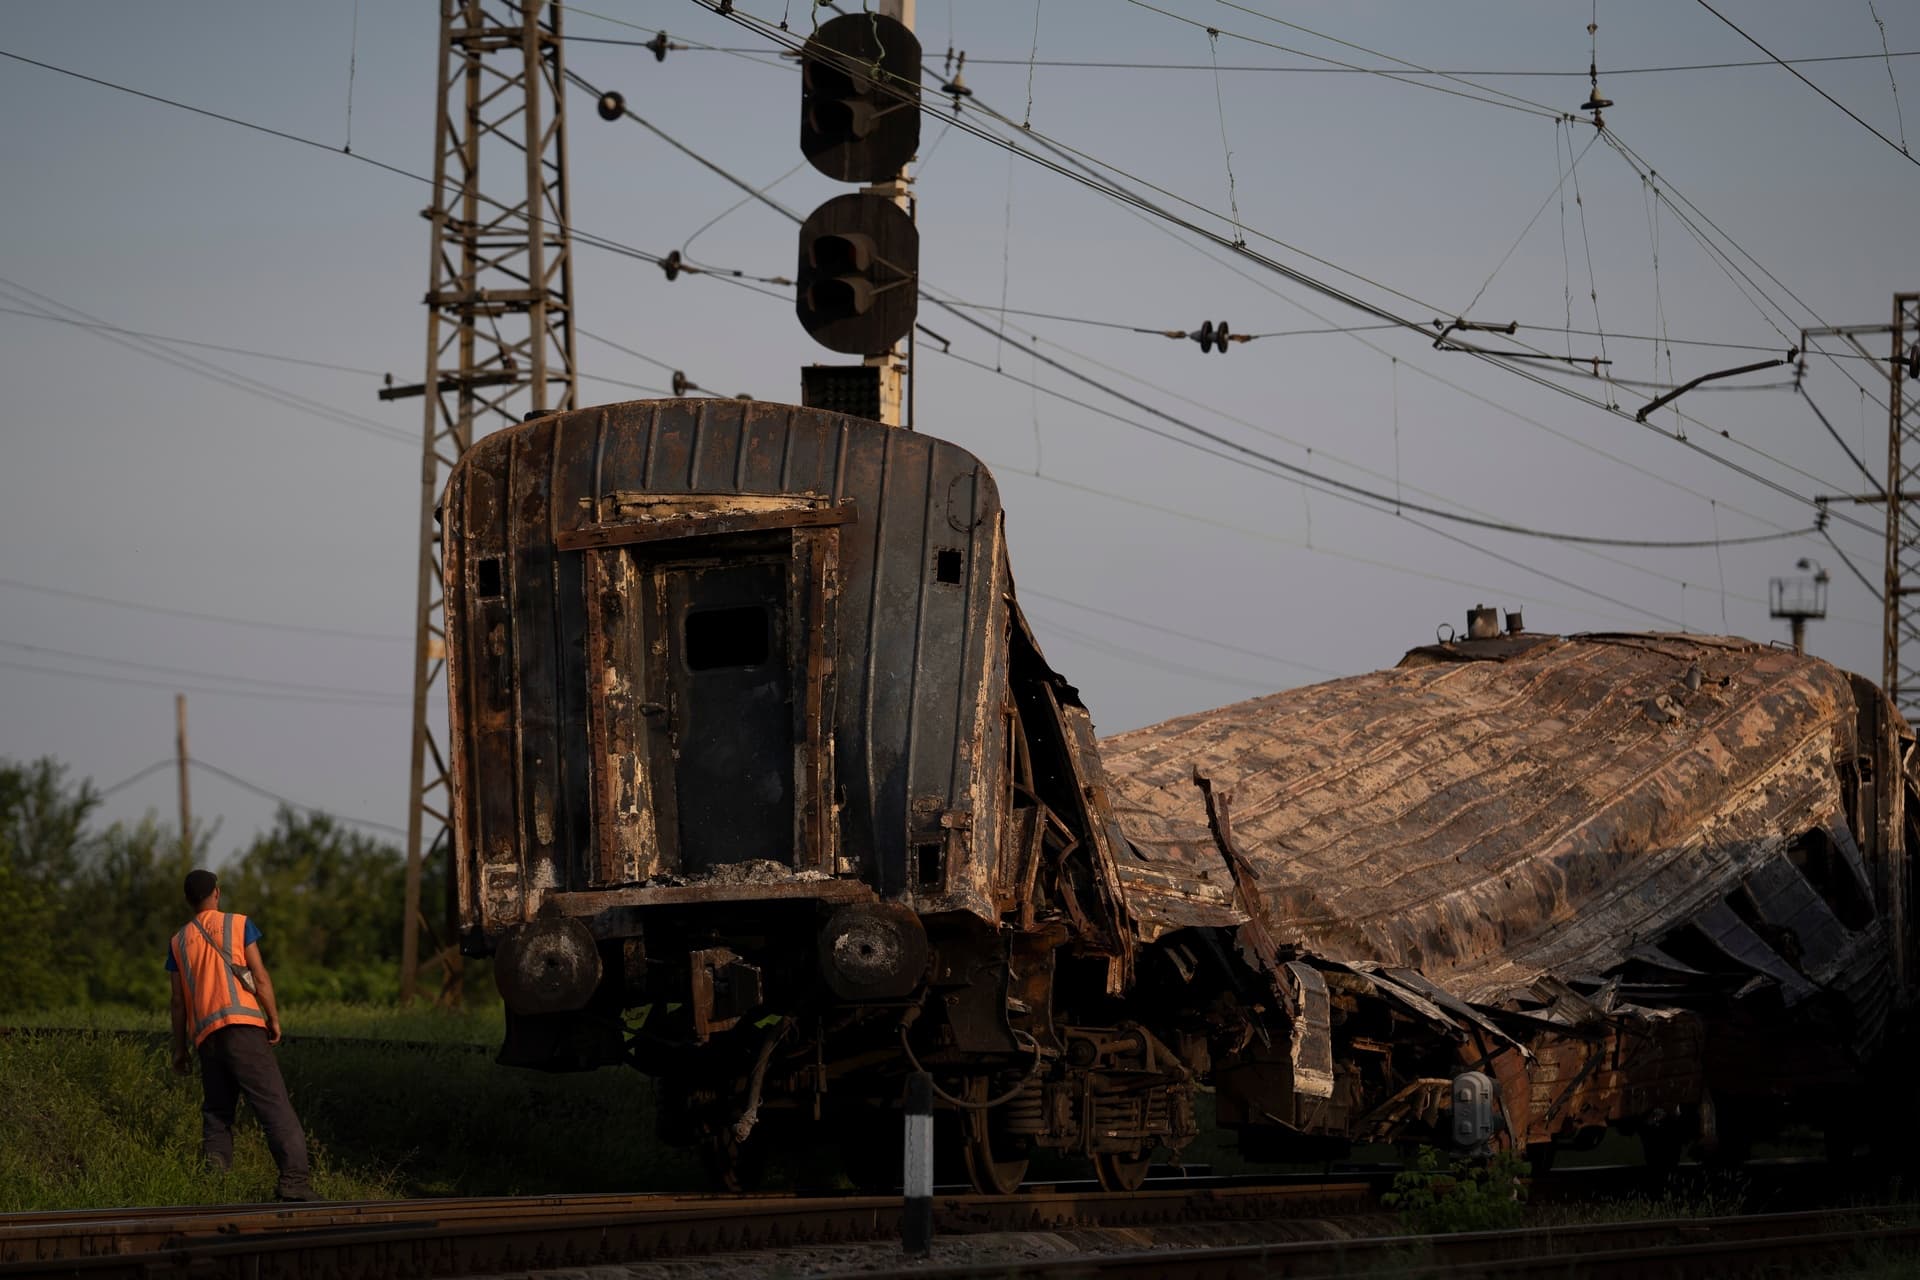 A railway worker looks at a heavily damaged train after a Russian attack on a train station Wednesday during Ukraine's Independence Day in the village Chaplyne